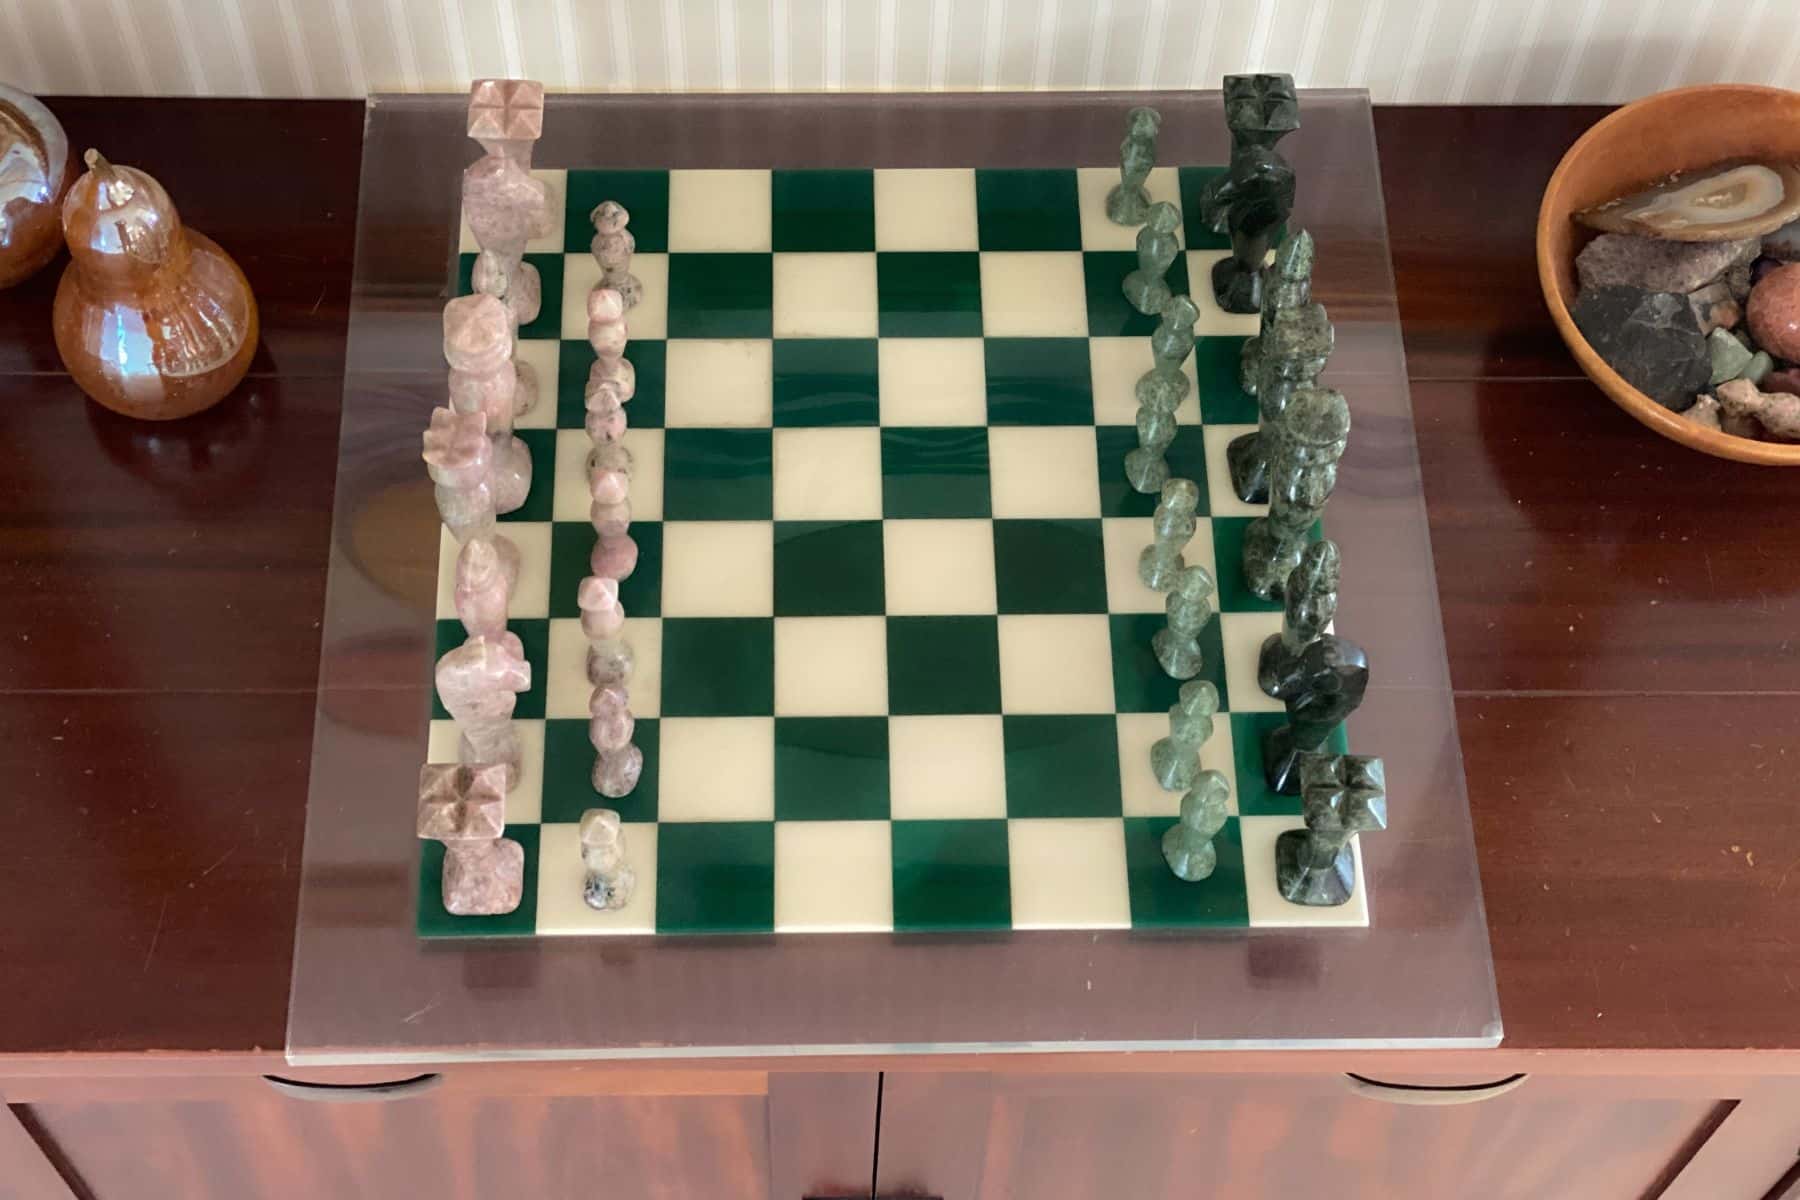 Displaying something sentimental like a chess set is a good example of striking balance in decluttering